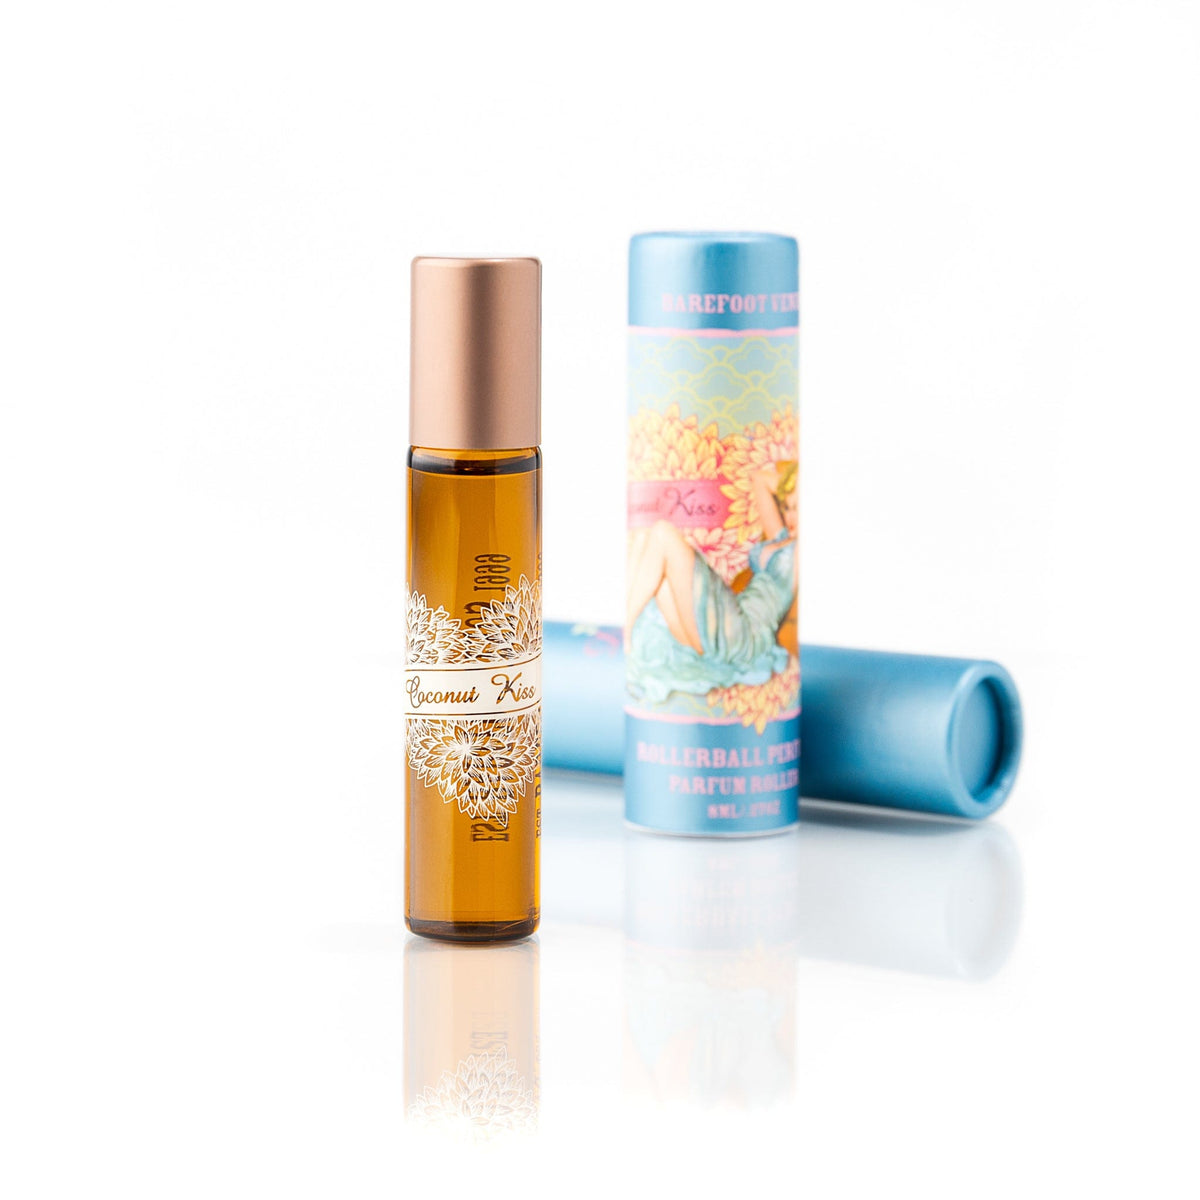 Perfume Oil ROLL ON YOUR FAVOURITE PERFUME Barefoot Venus